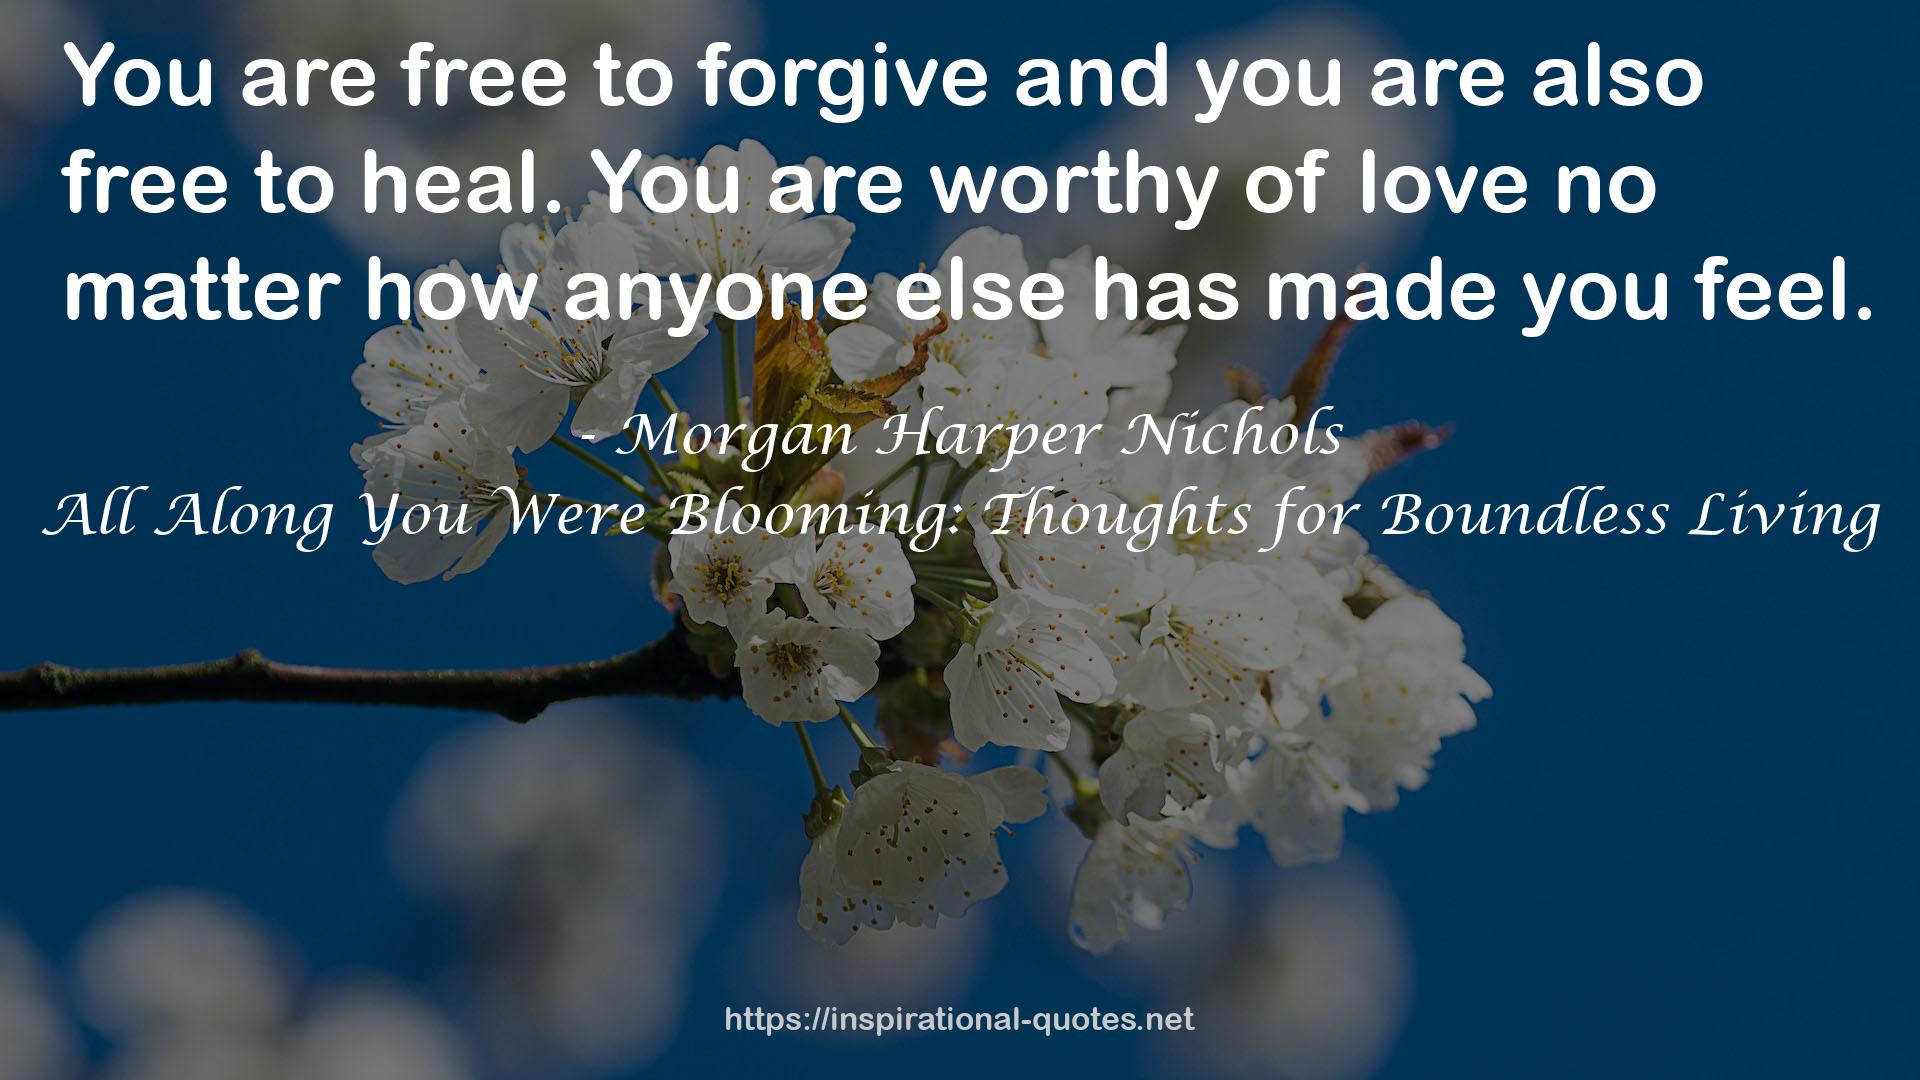 All Along You Were Blooming: Thoughts for Boundless Living QUOTES